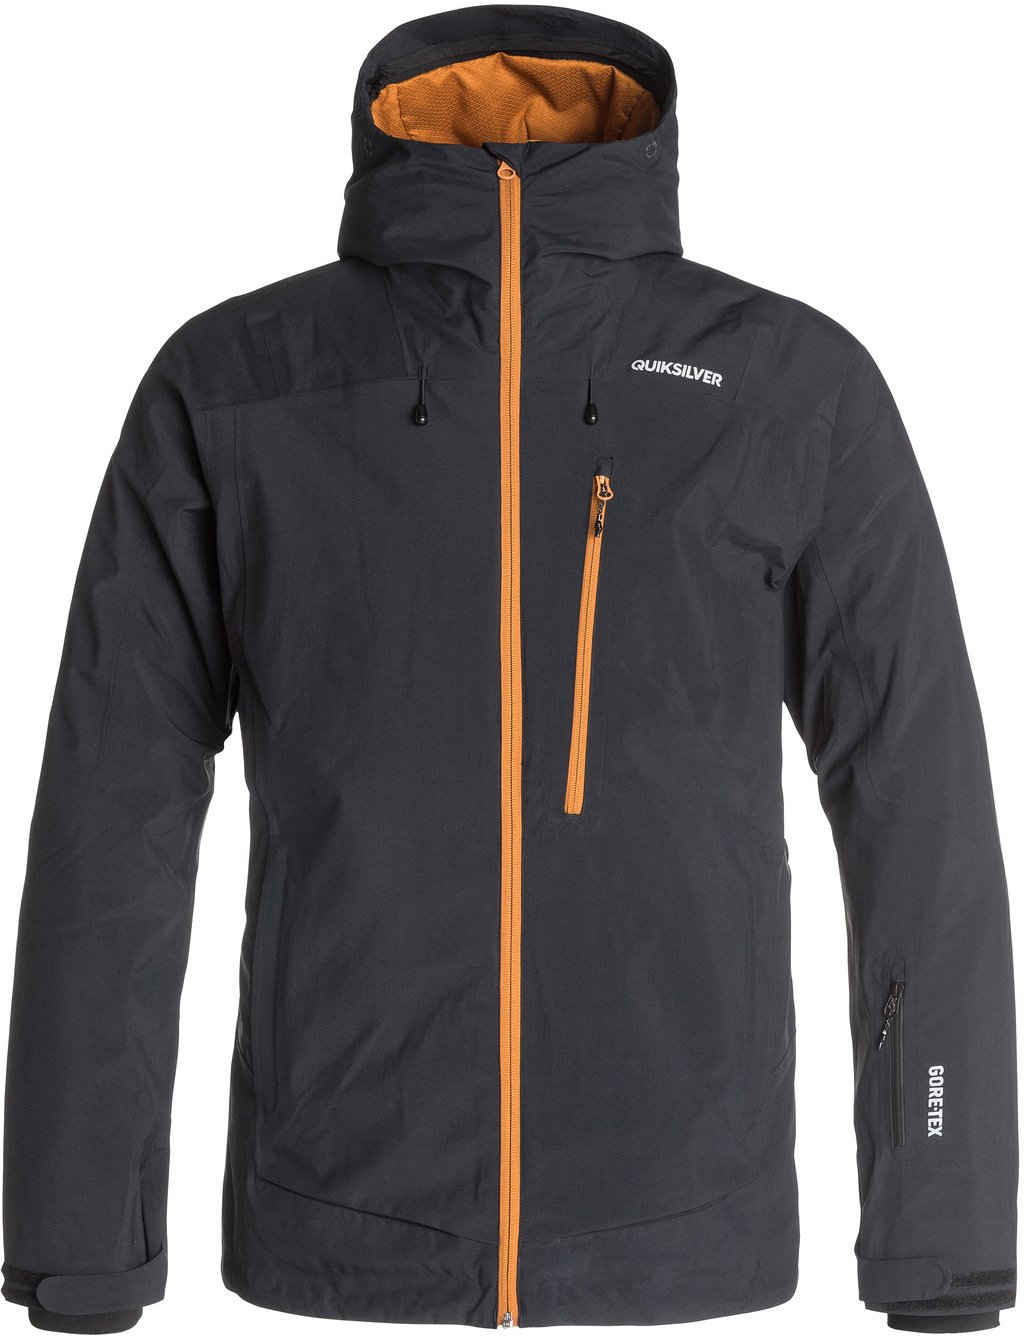 Quiksilver Inyo Jacket Review - The Good Ride